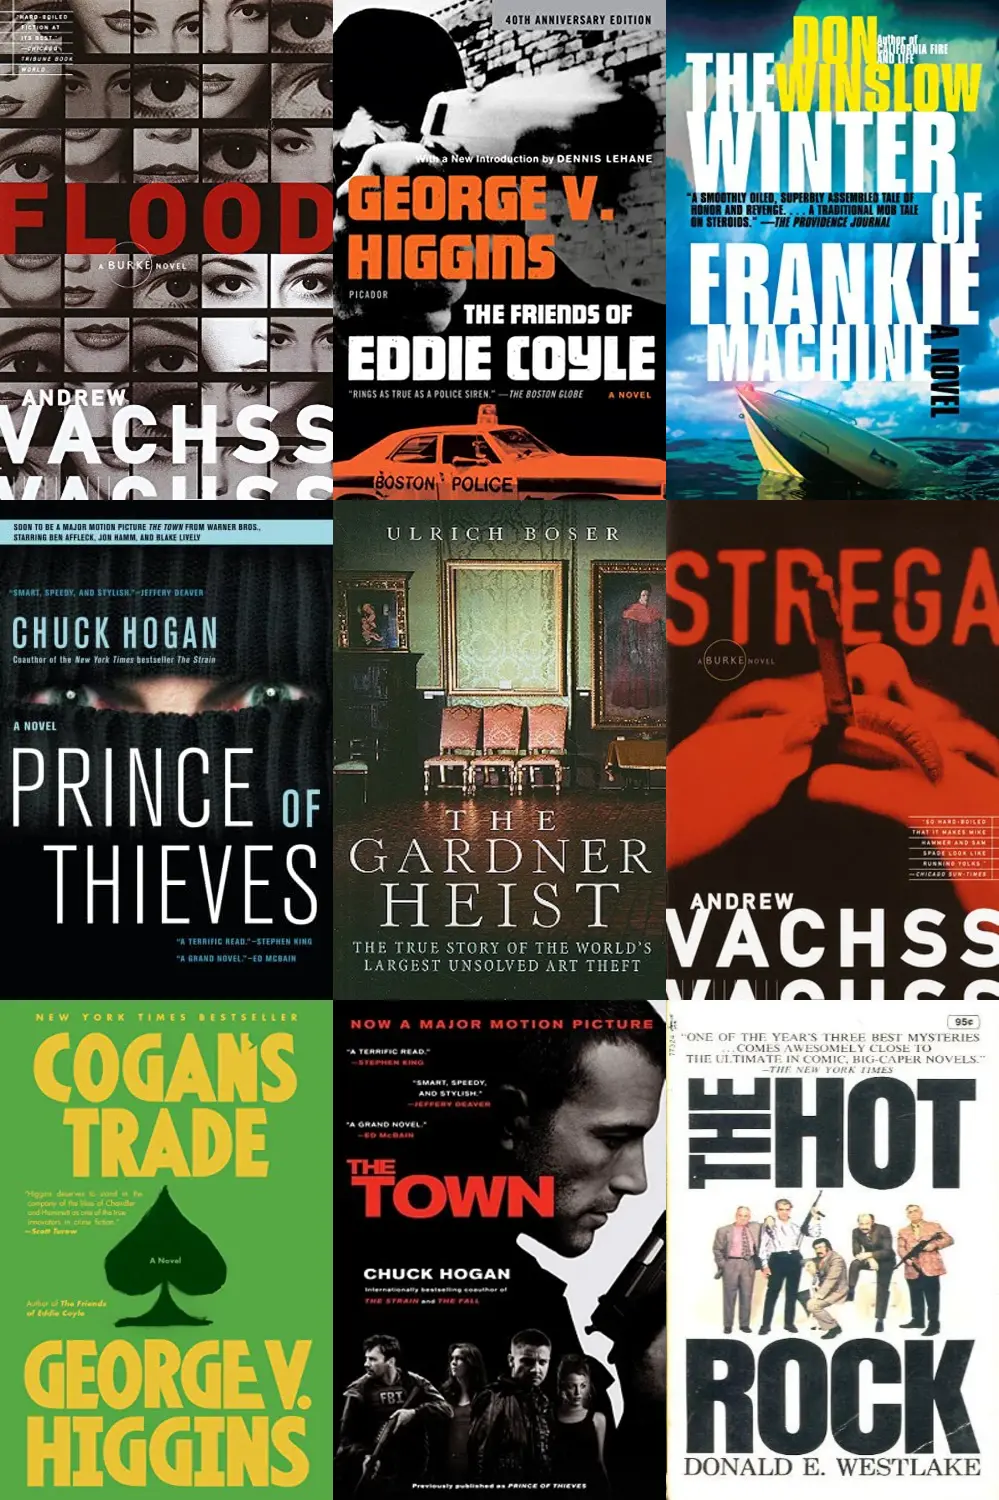 If I liked The Lock Artist by Steve Hamilton, what should I read next?